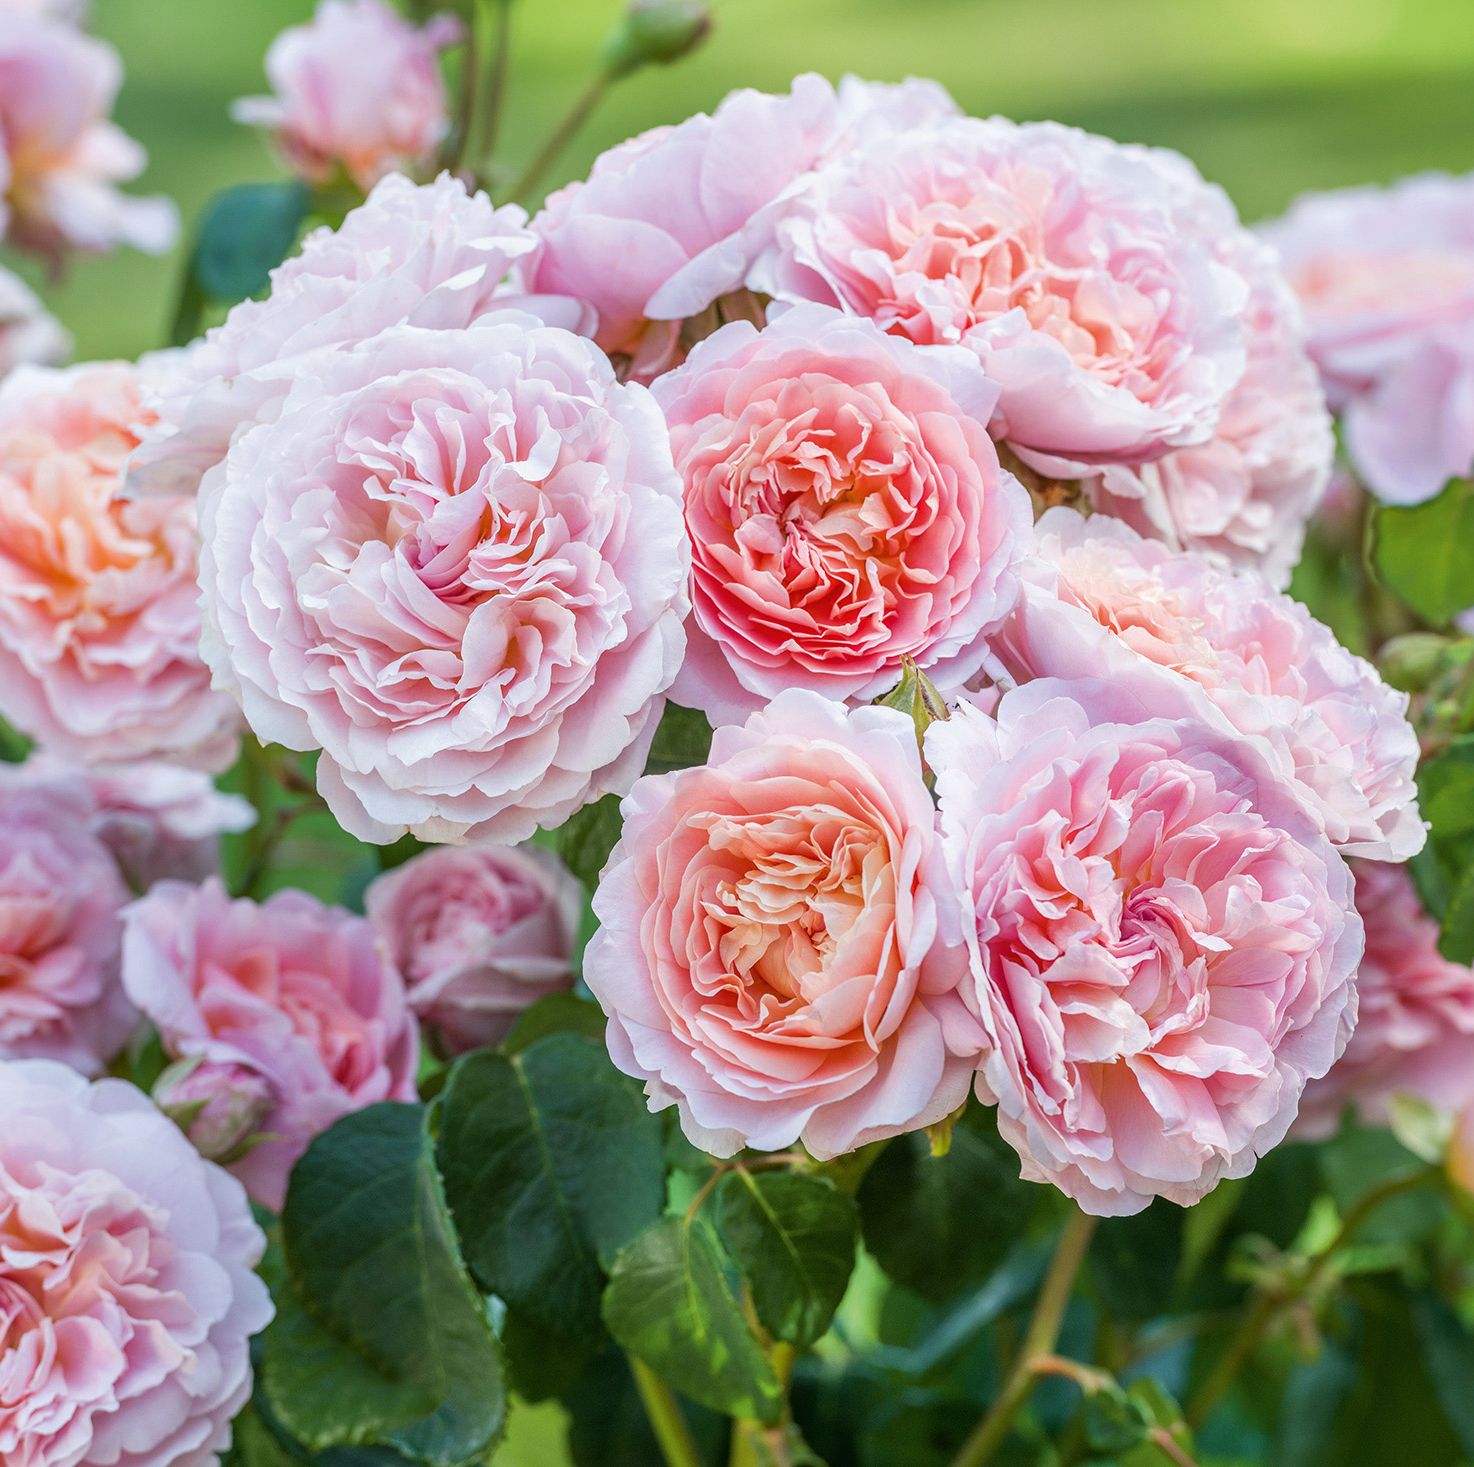 New roses at Chelsea Flower Show 2019